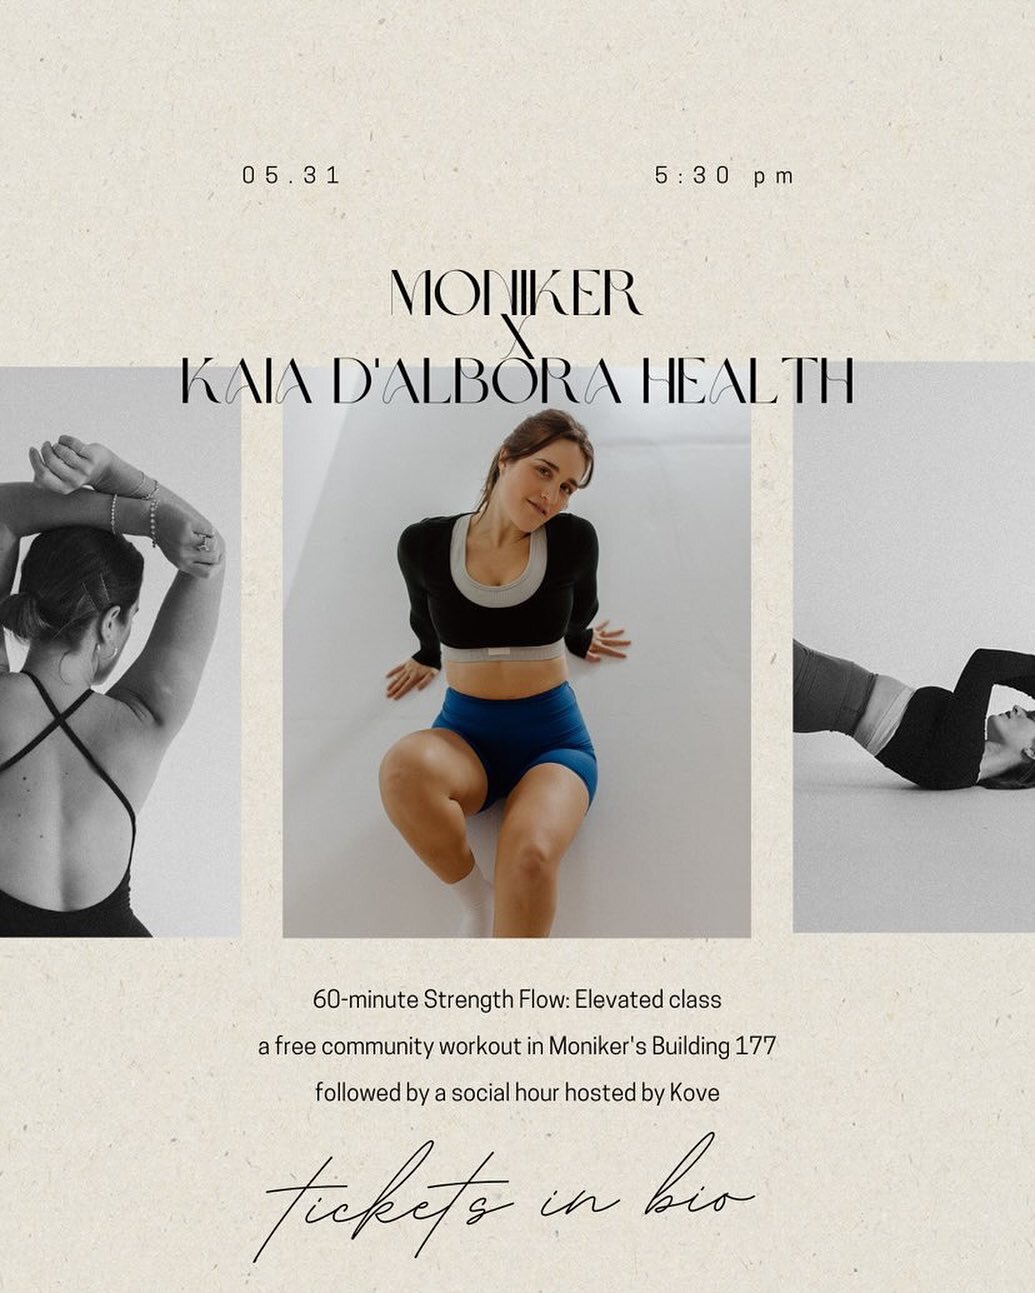 Wellness Series continues&hellip; To @bldg177! 

You don&rsquo;t want to miss this Elevated Strength Flow class with @kaiadalborahealth on May 31st 🤸&zwj;♀️

Get your FREE ticket in our bio to join in on KDH&rsquo;s signature format class! 

#sandie